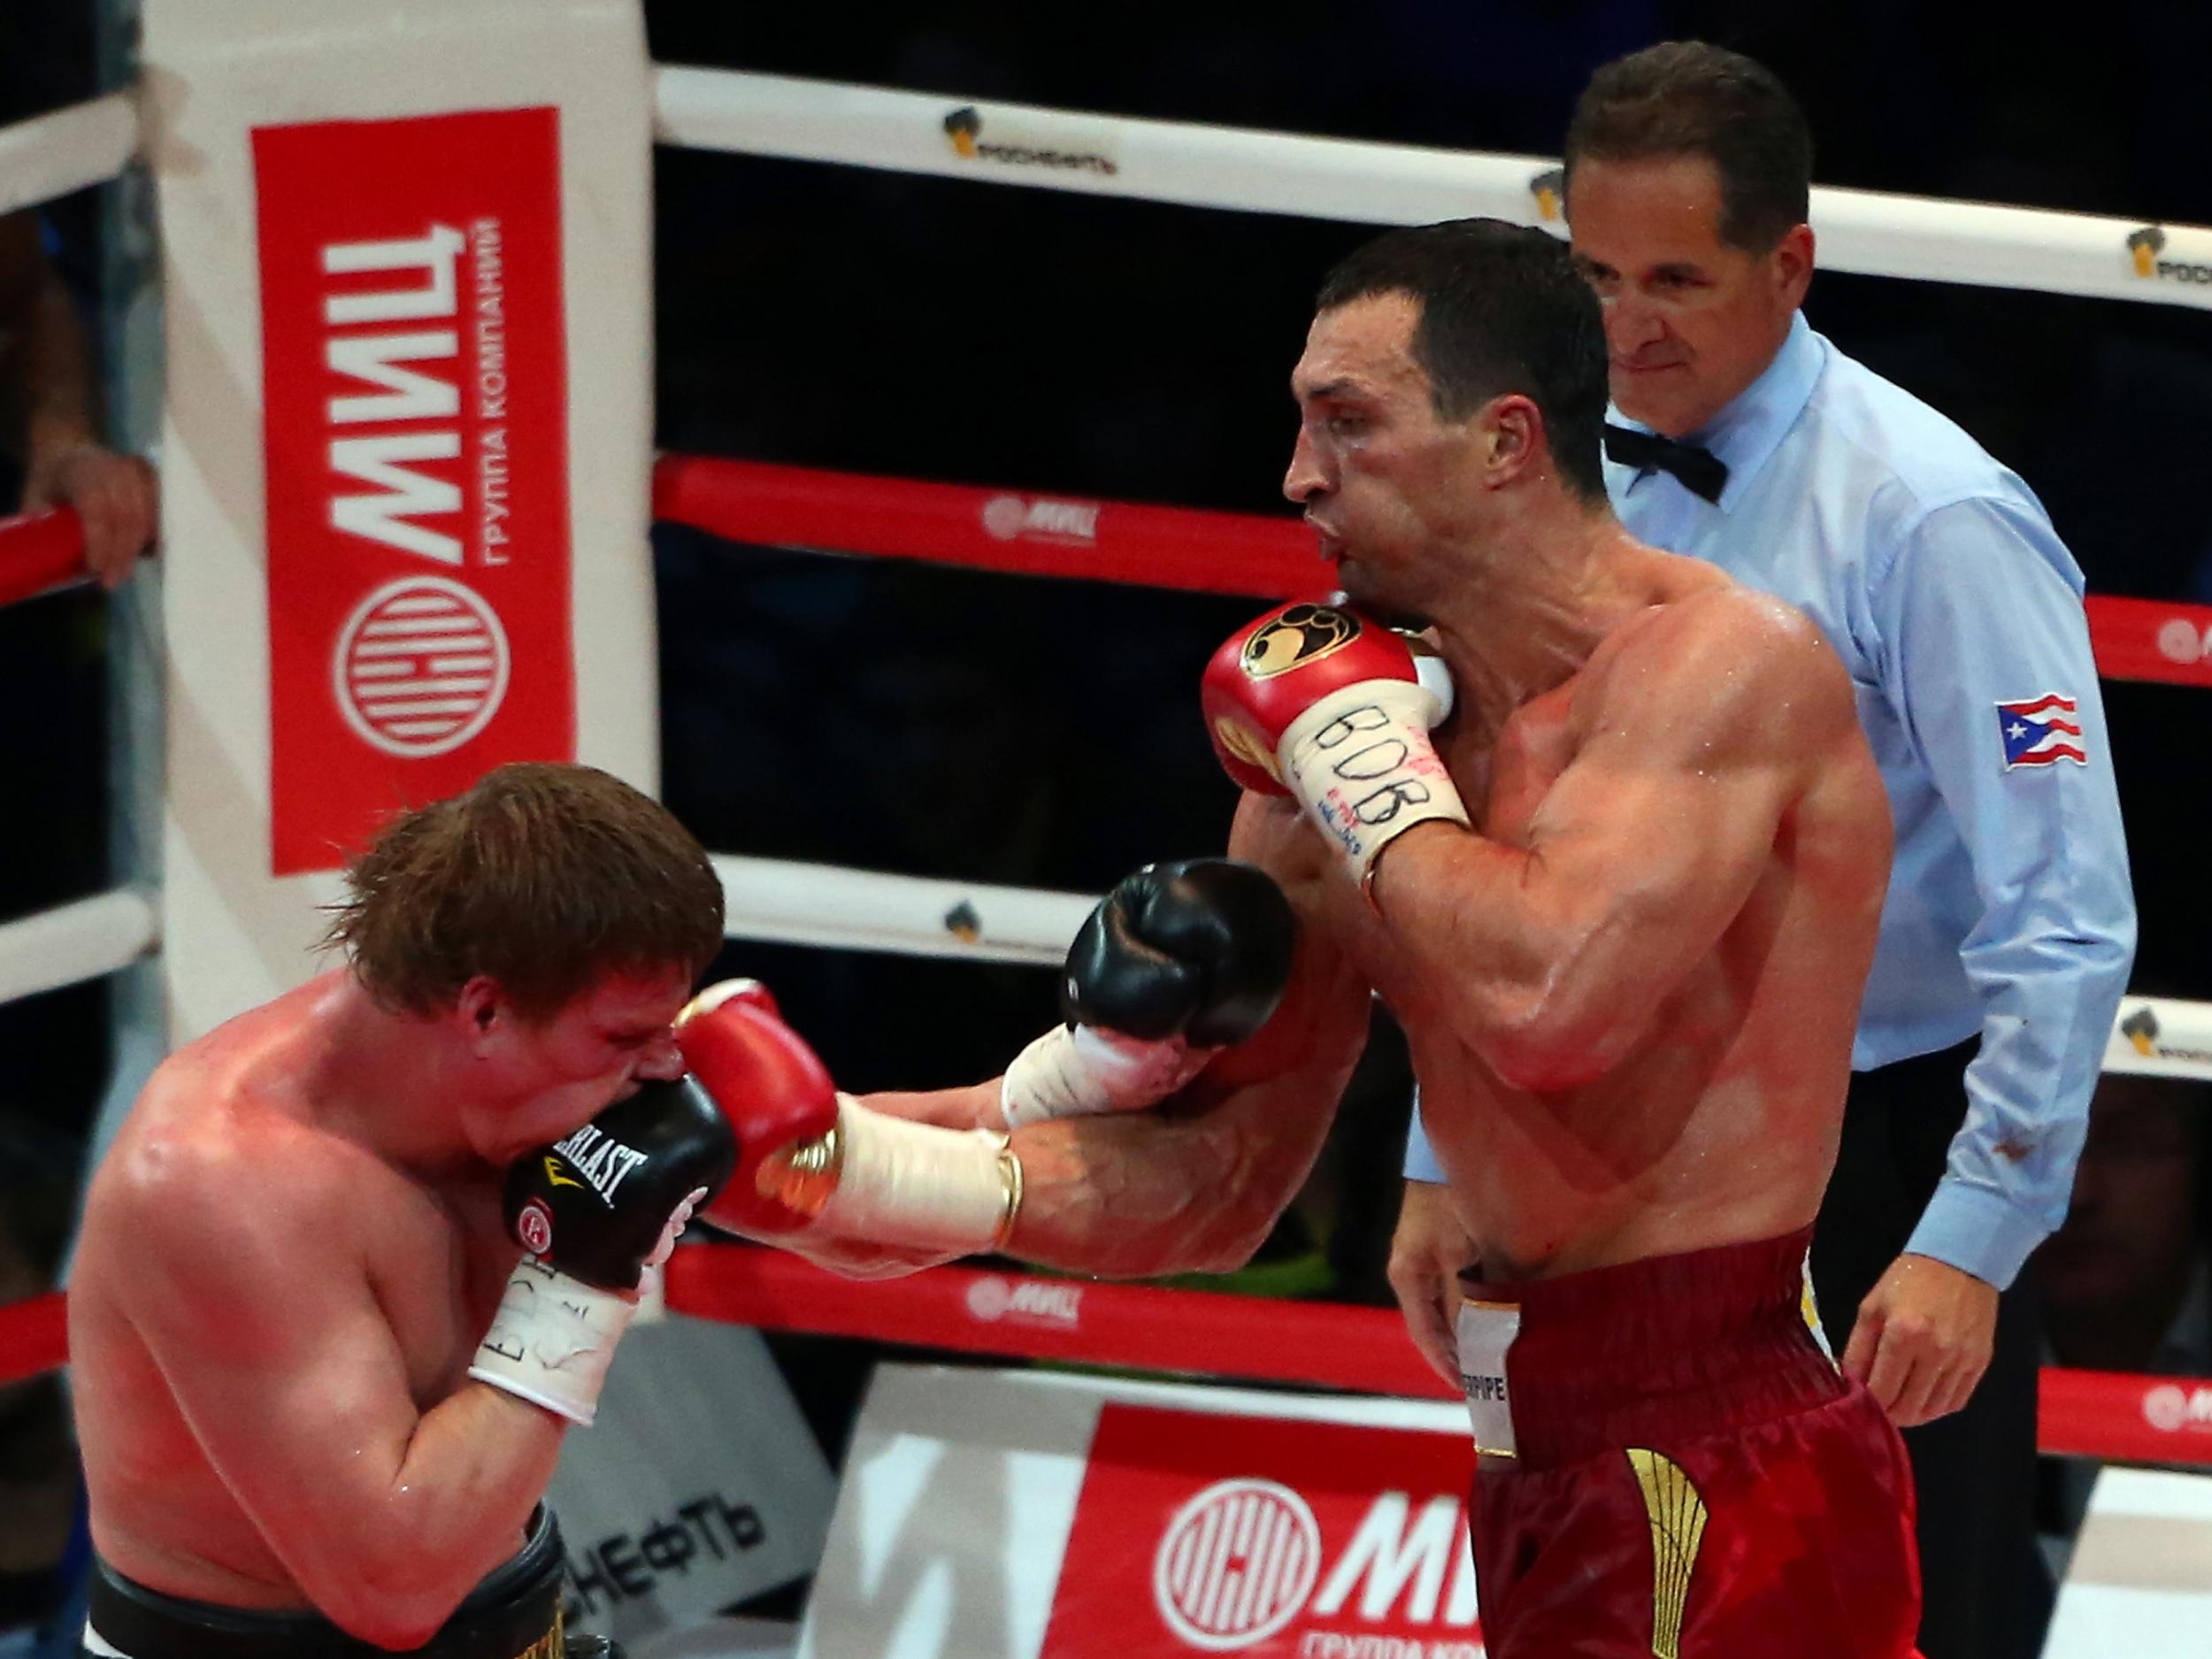 Povetkin’s only professional defeat came at the hands of Wladimir Klitschko